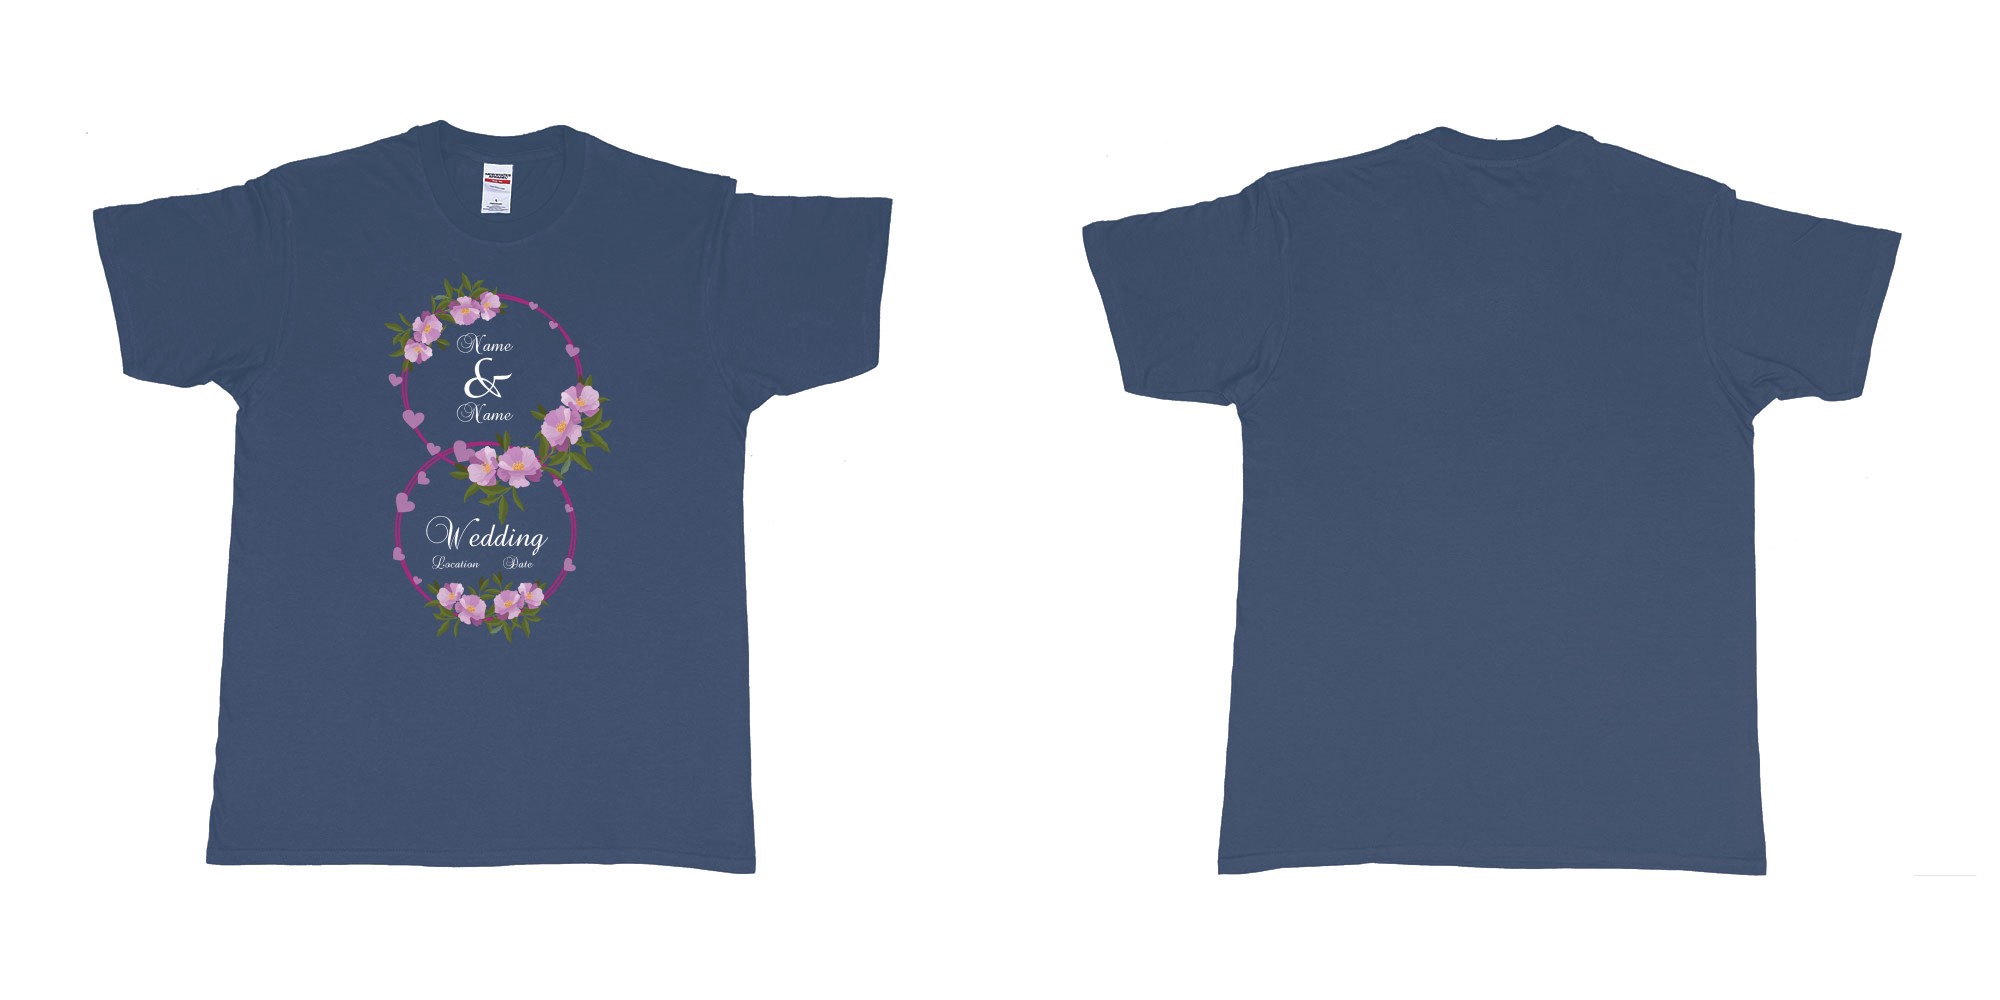 Custom tshirt design wedding hearts flower rings in fabric color navy choice your own text made in Bali by The Pirate Way